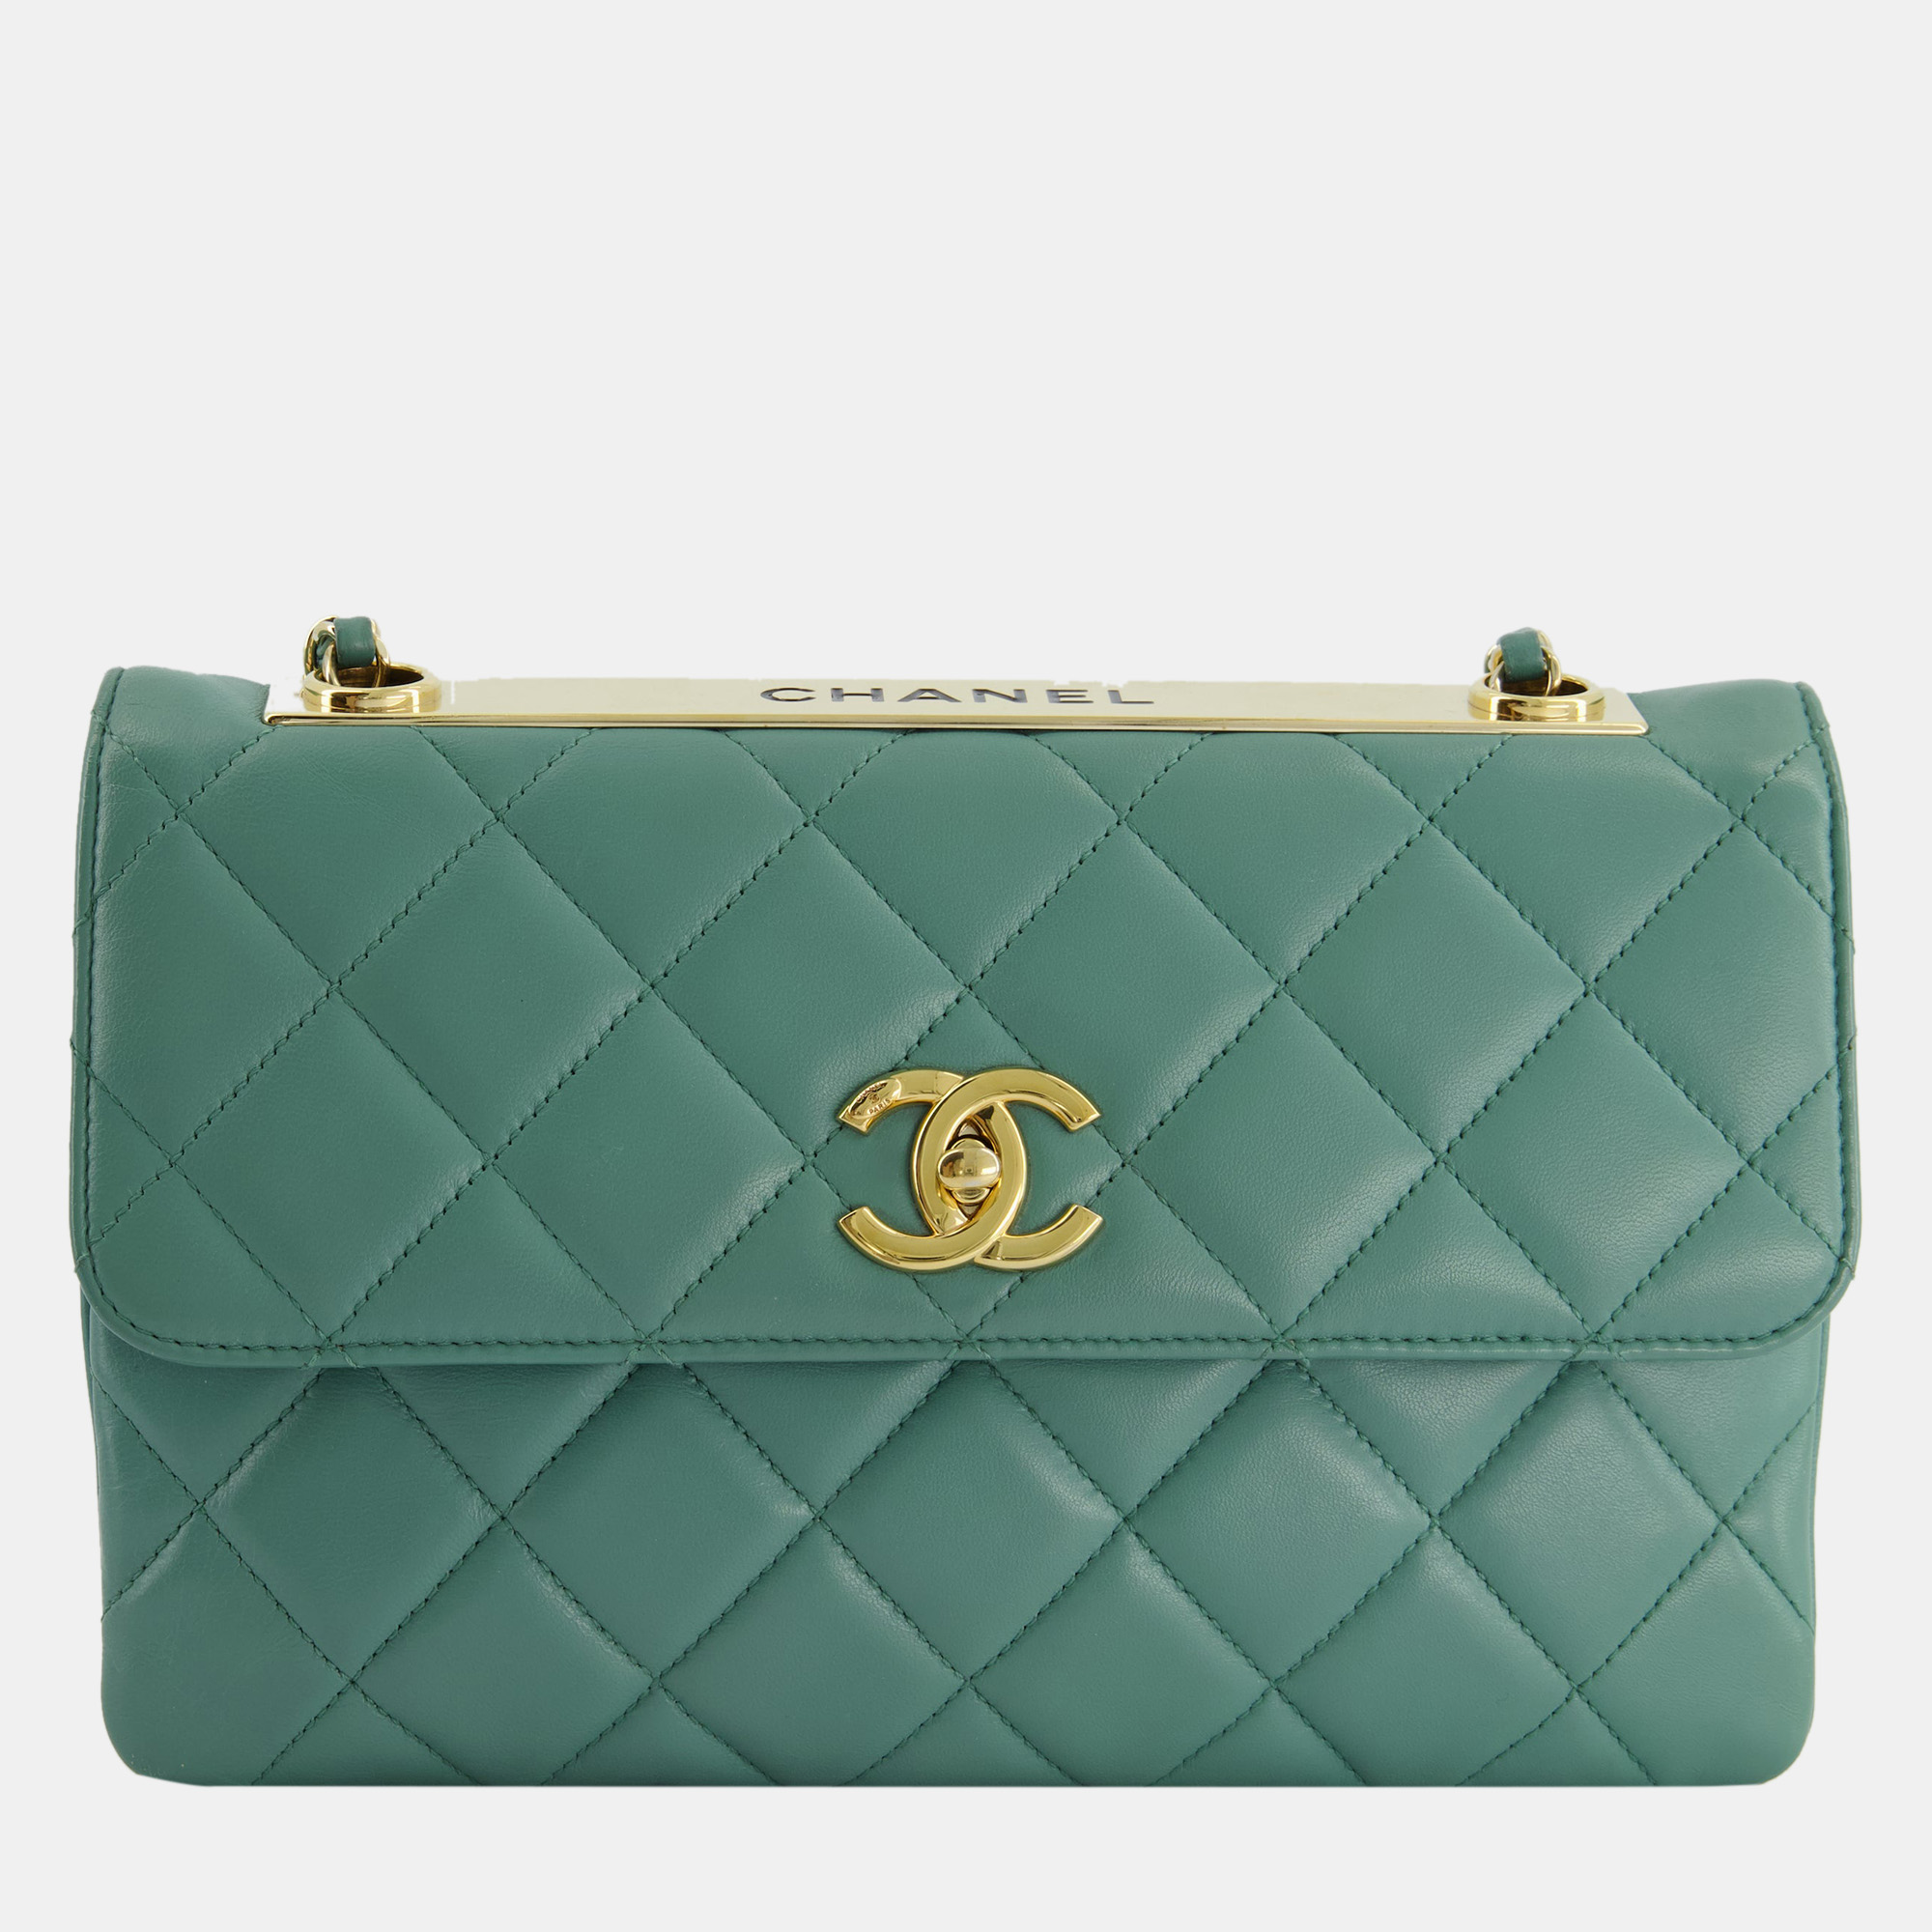 Chanel teal trendy cc shoulder bag in lambskin leather with gold hardware